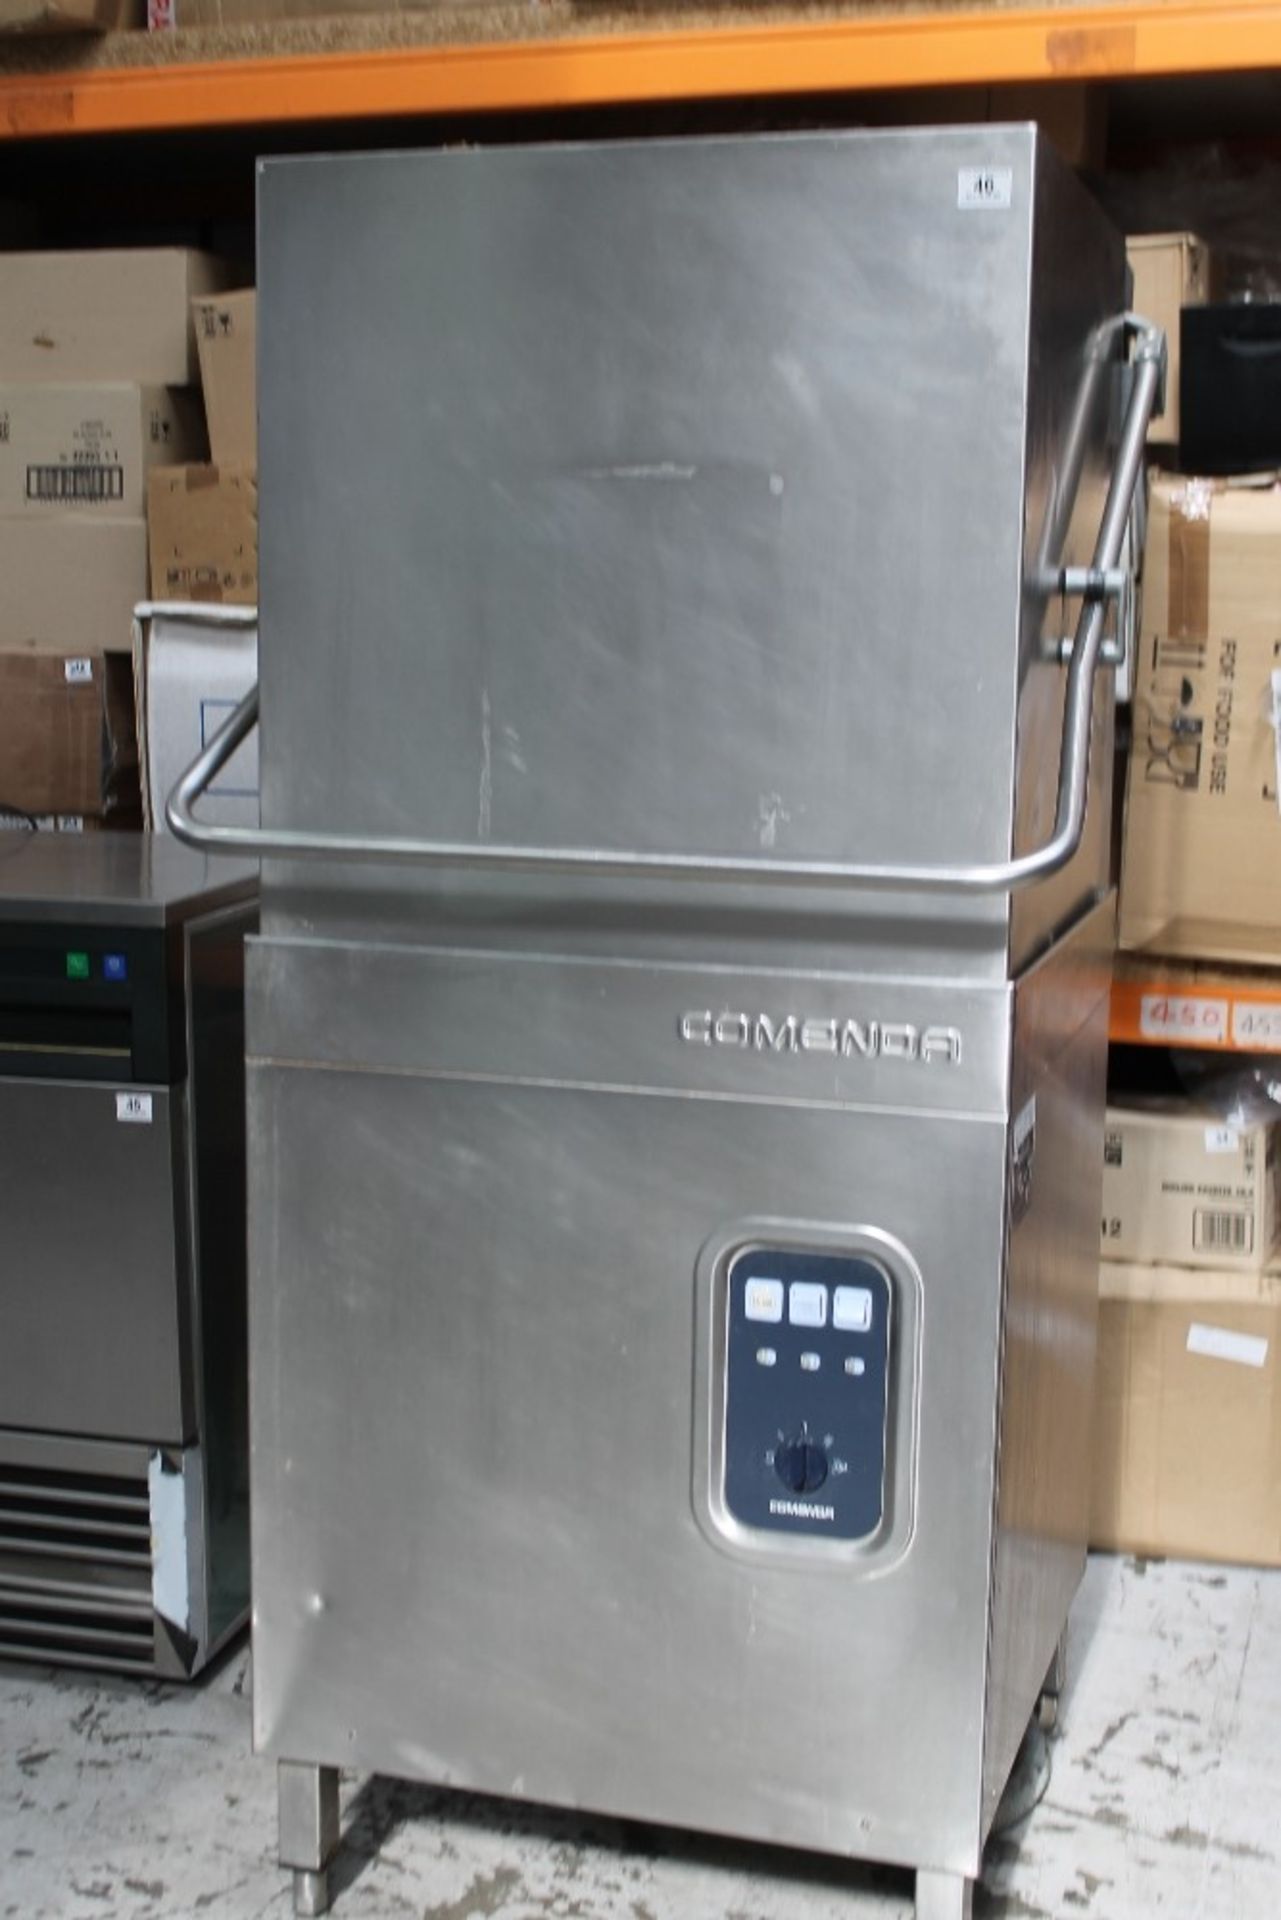 Comenda Passthrough Dishwasher – Tested – very clean – NO VAT